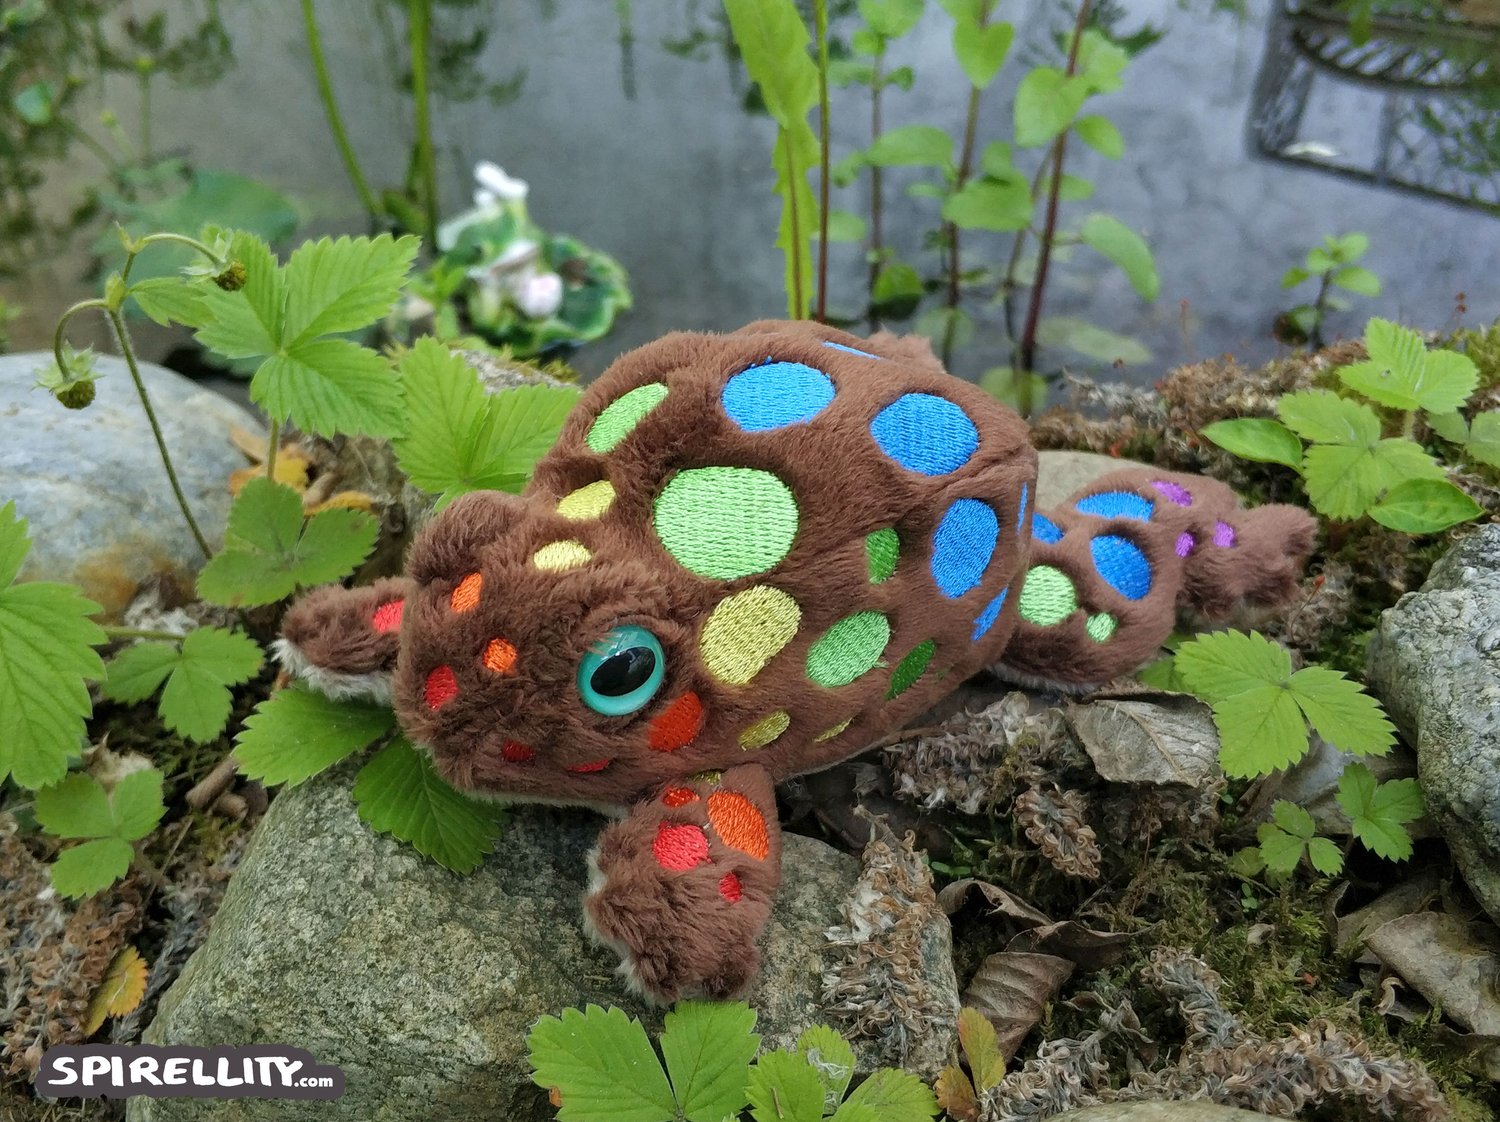 Plush toy of a toad with rainbow spots